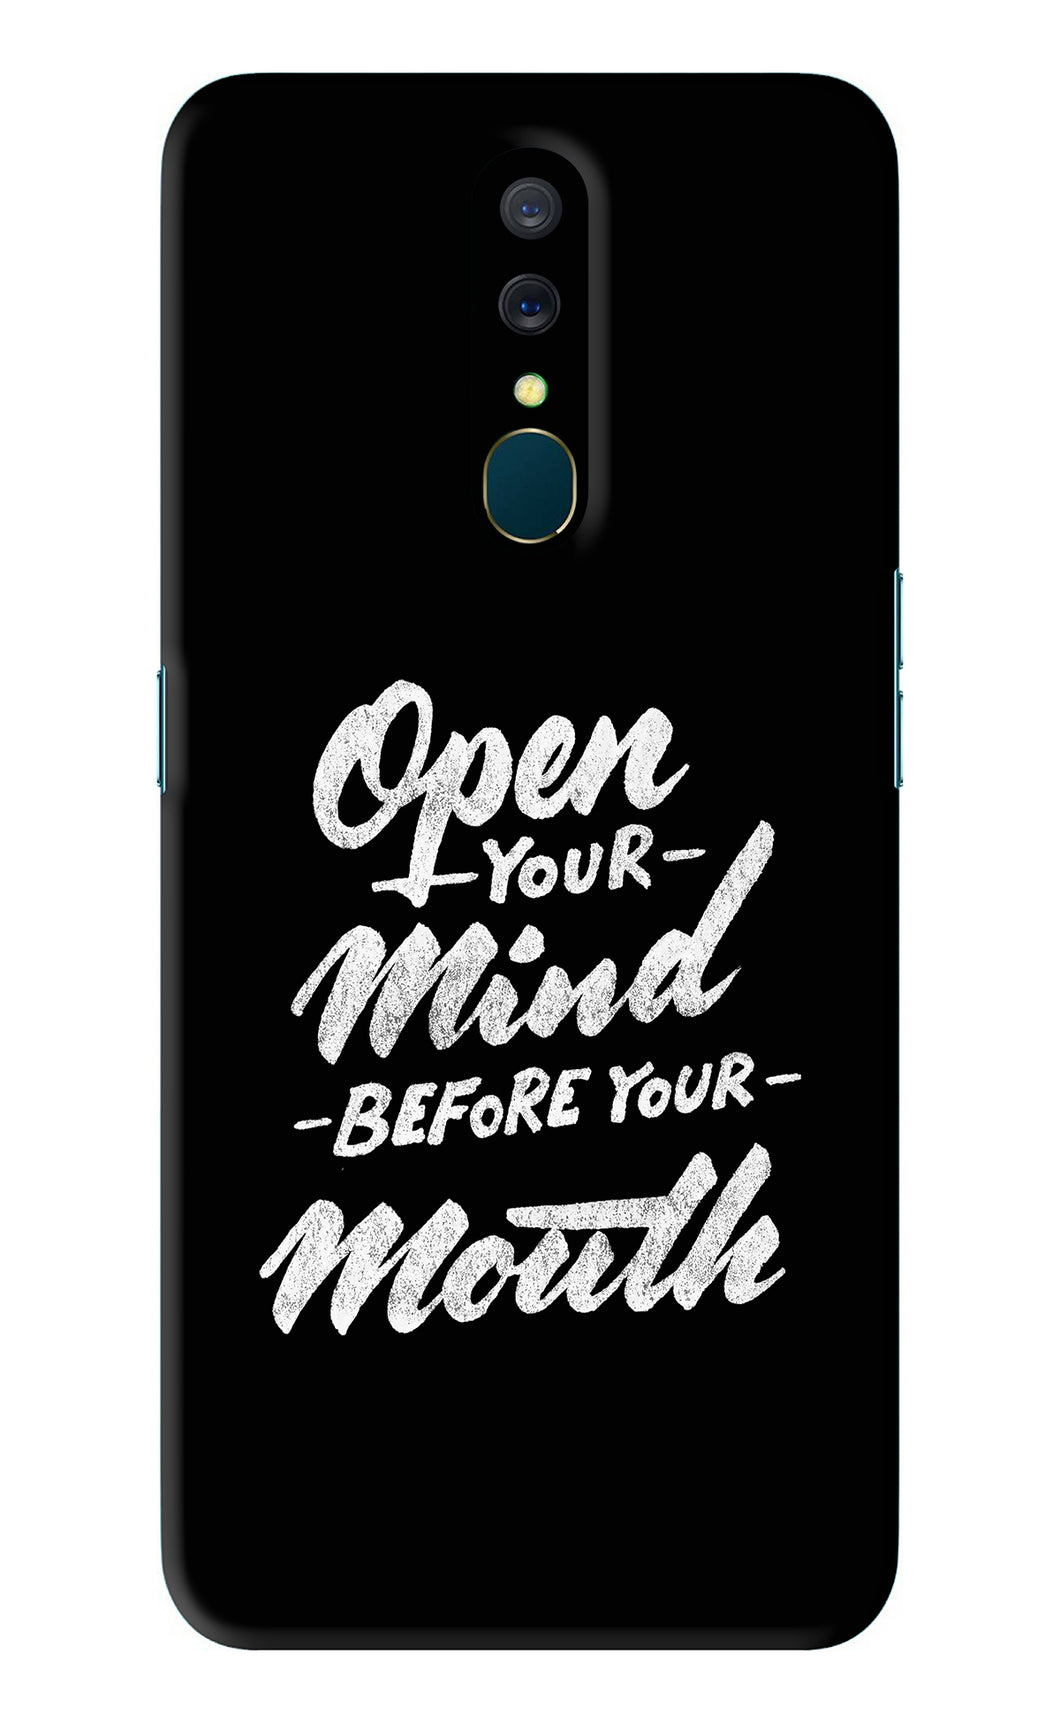 Open Your Mind Before Your Mouth Oppo A9 Back Skin Wrap